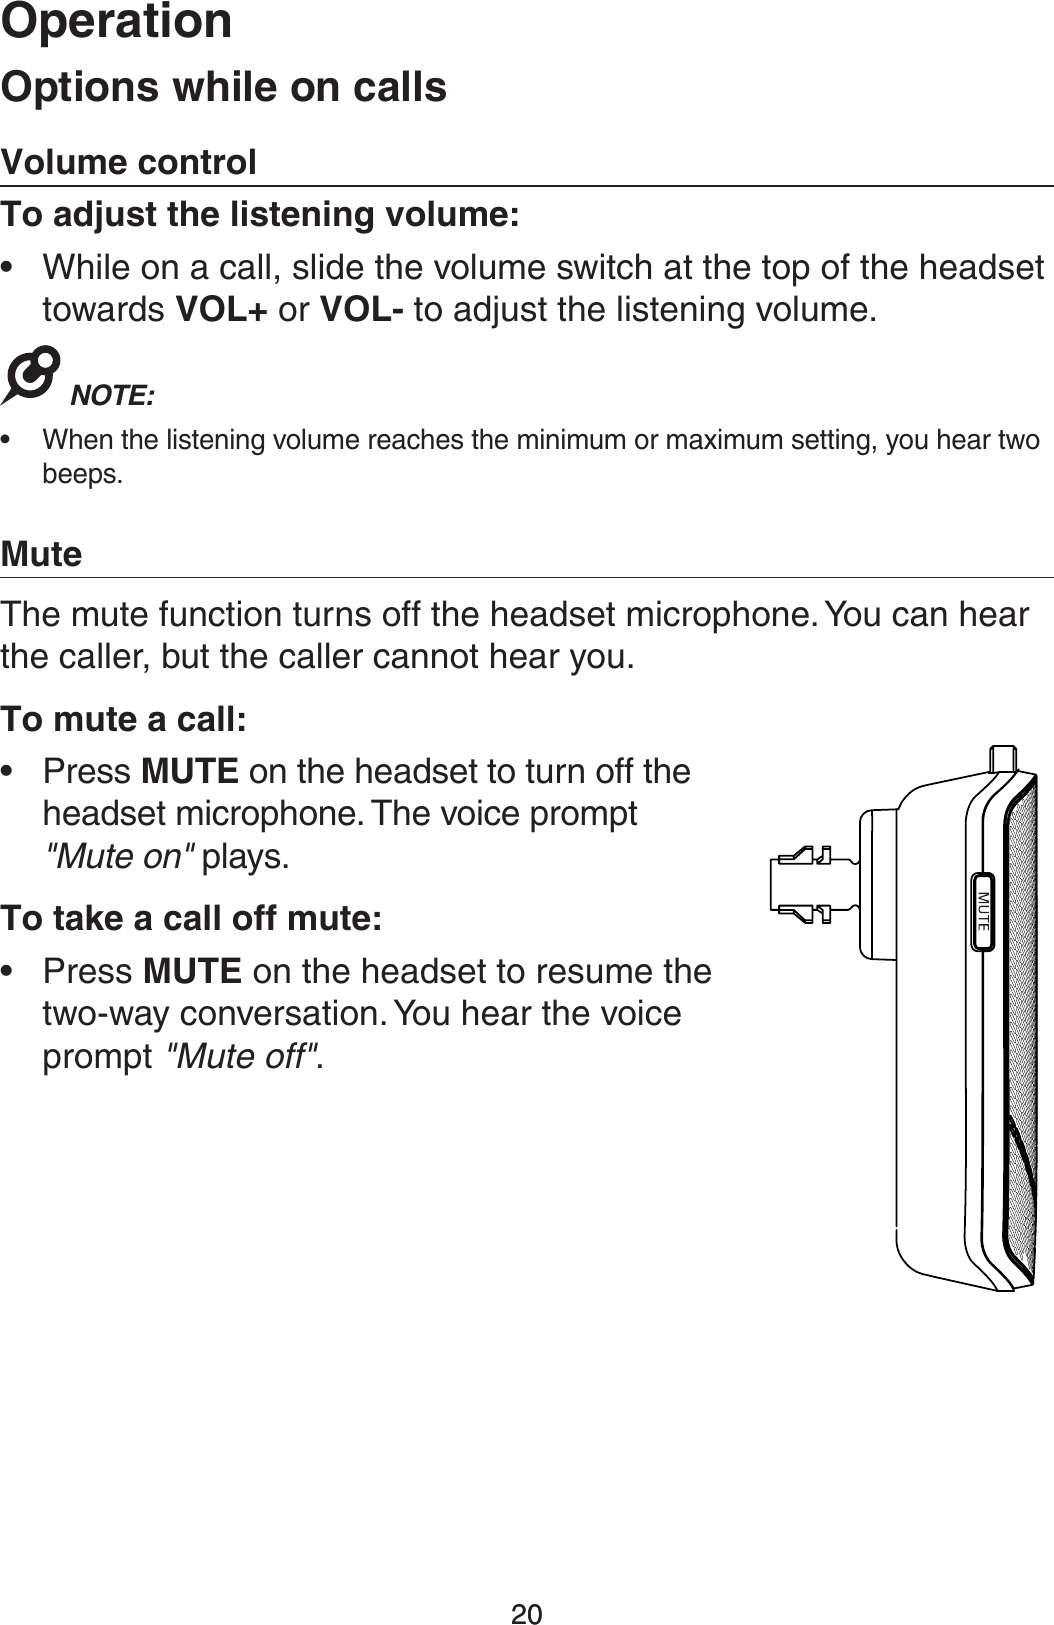 200QFSBUJPO200QUJPOTXIJMFPODBMMT7PMVNFDPOUSPM5PBEKVTUUIFMJTUFOJOHWPMVNFWhile on a call, slide the volume switch at the top of the headset towards 70- or 70- to adjust the listening volume./05&amp; When the listening volume reaches the minimum or maximum setting, you hear two beeps..VUFThe mute function turns off the headset microphone. You can hear the caller, but the caller cannot hear you. 5PNVUFBDBMM•  Press .65&amp;on the headset to turn off the headset microphone. The voice prompt &quot;Mute on&quot; plays.5PUBLFBDBMMPGGNVUF•  Press .65&amp; on the headset to resume the  two-way conversation. You hear the voice prompt &quot;Mute off&quot;.••